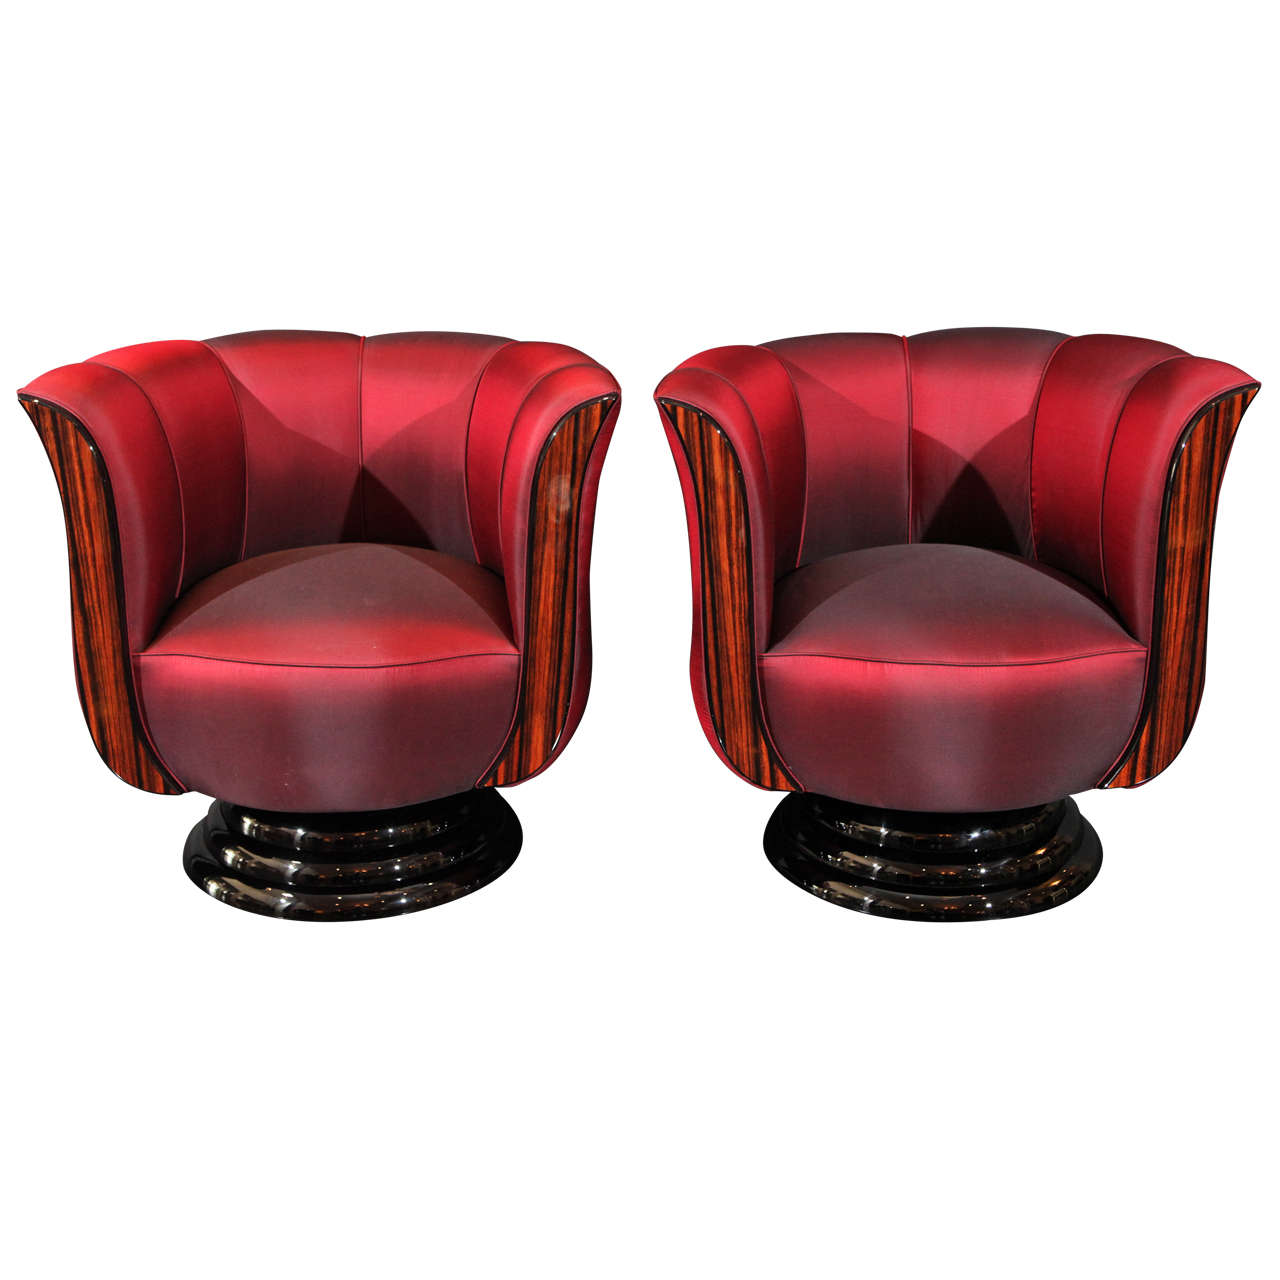 Pair of Red Silk Tulip Chairs For Sale